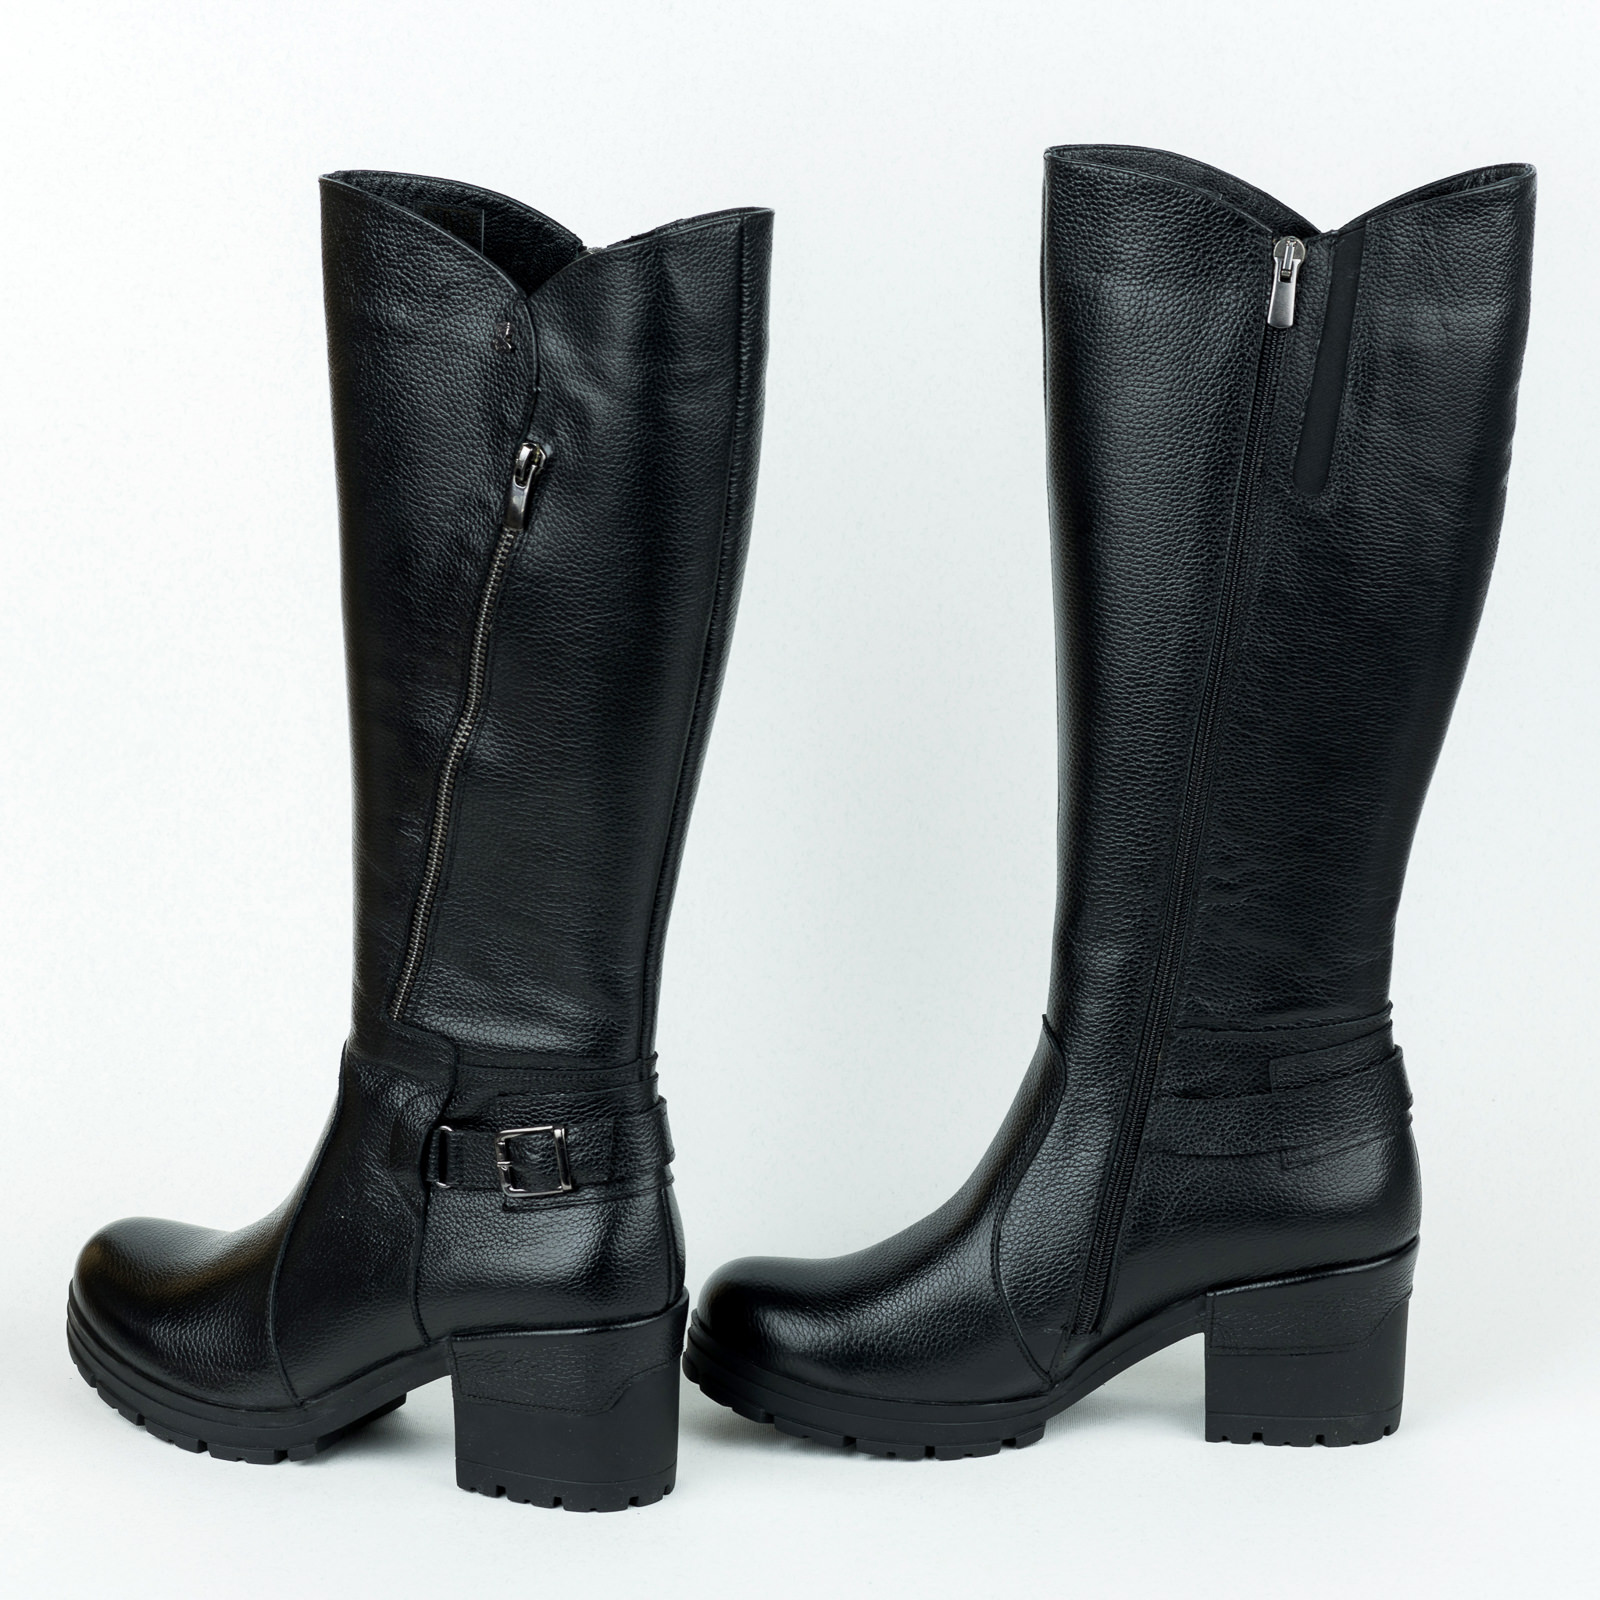 Leather boots B636 - BLACK